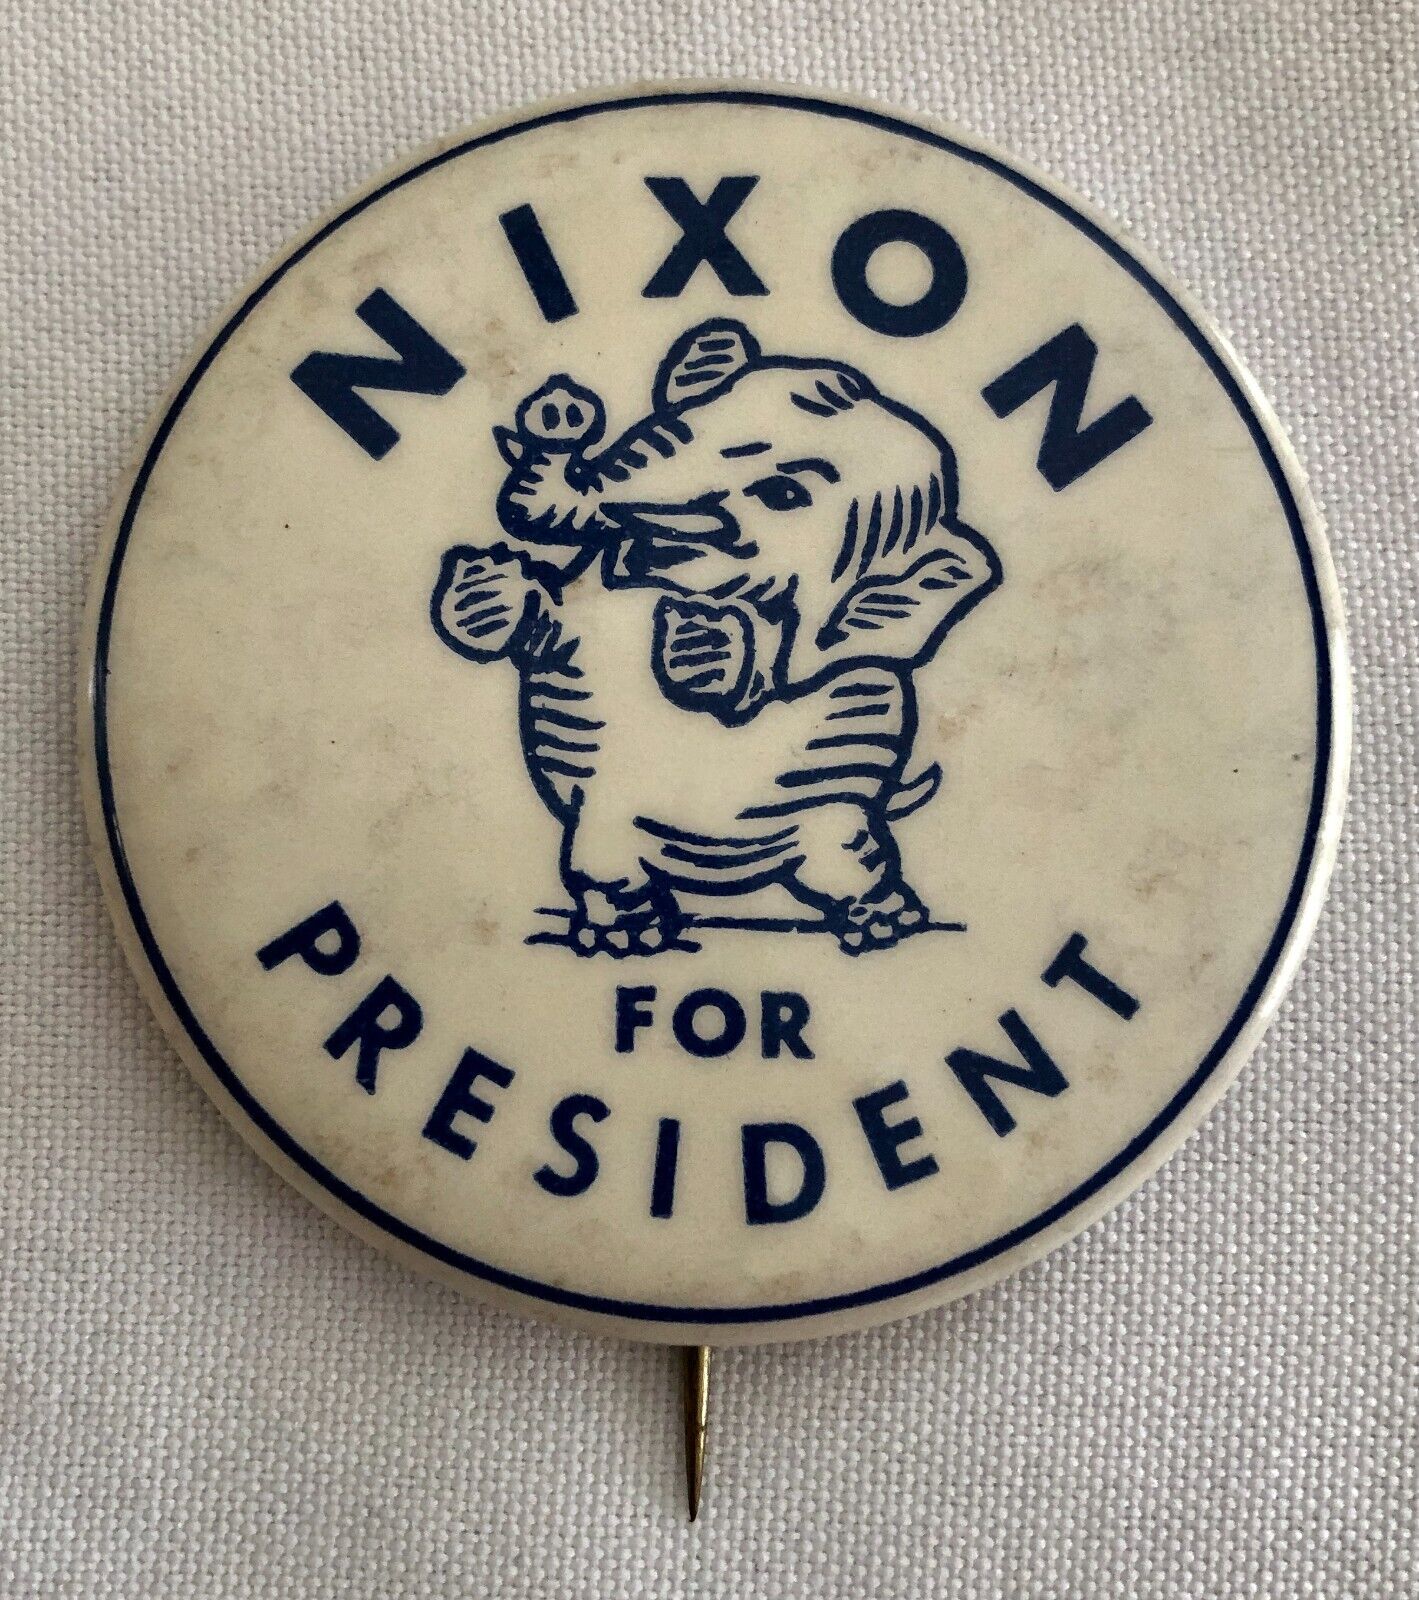 NIXON FOR PRESIDENT -- PRIVATELY ISSUED 1960 BUTTON - 